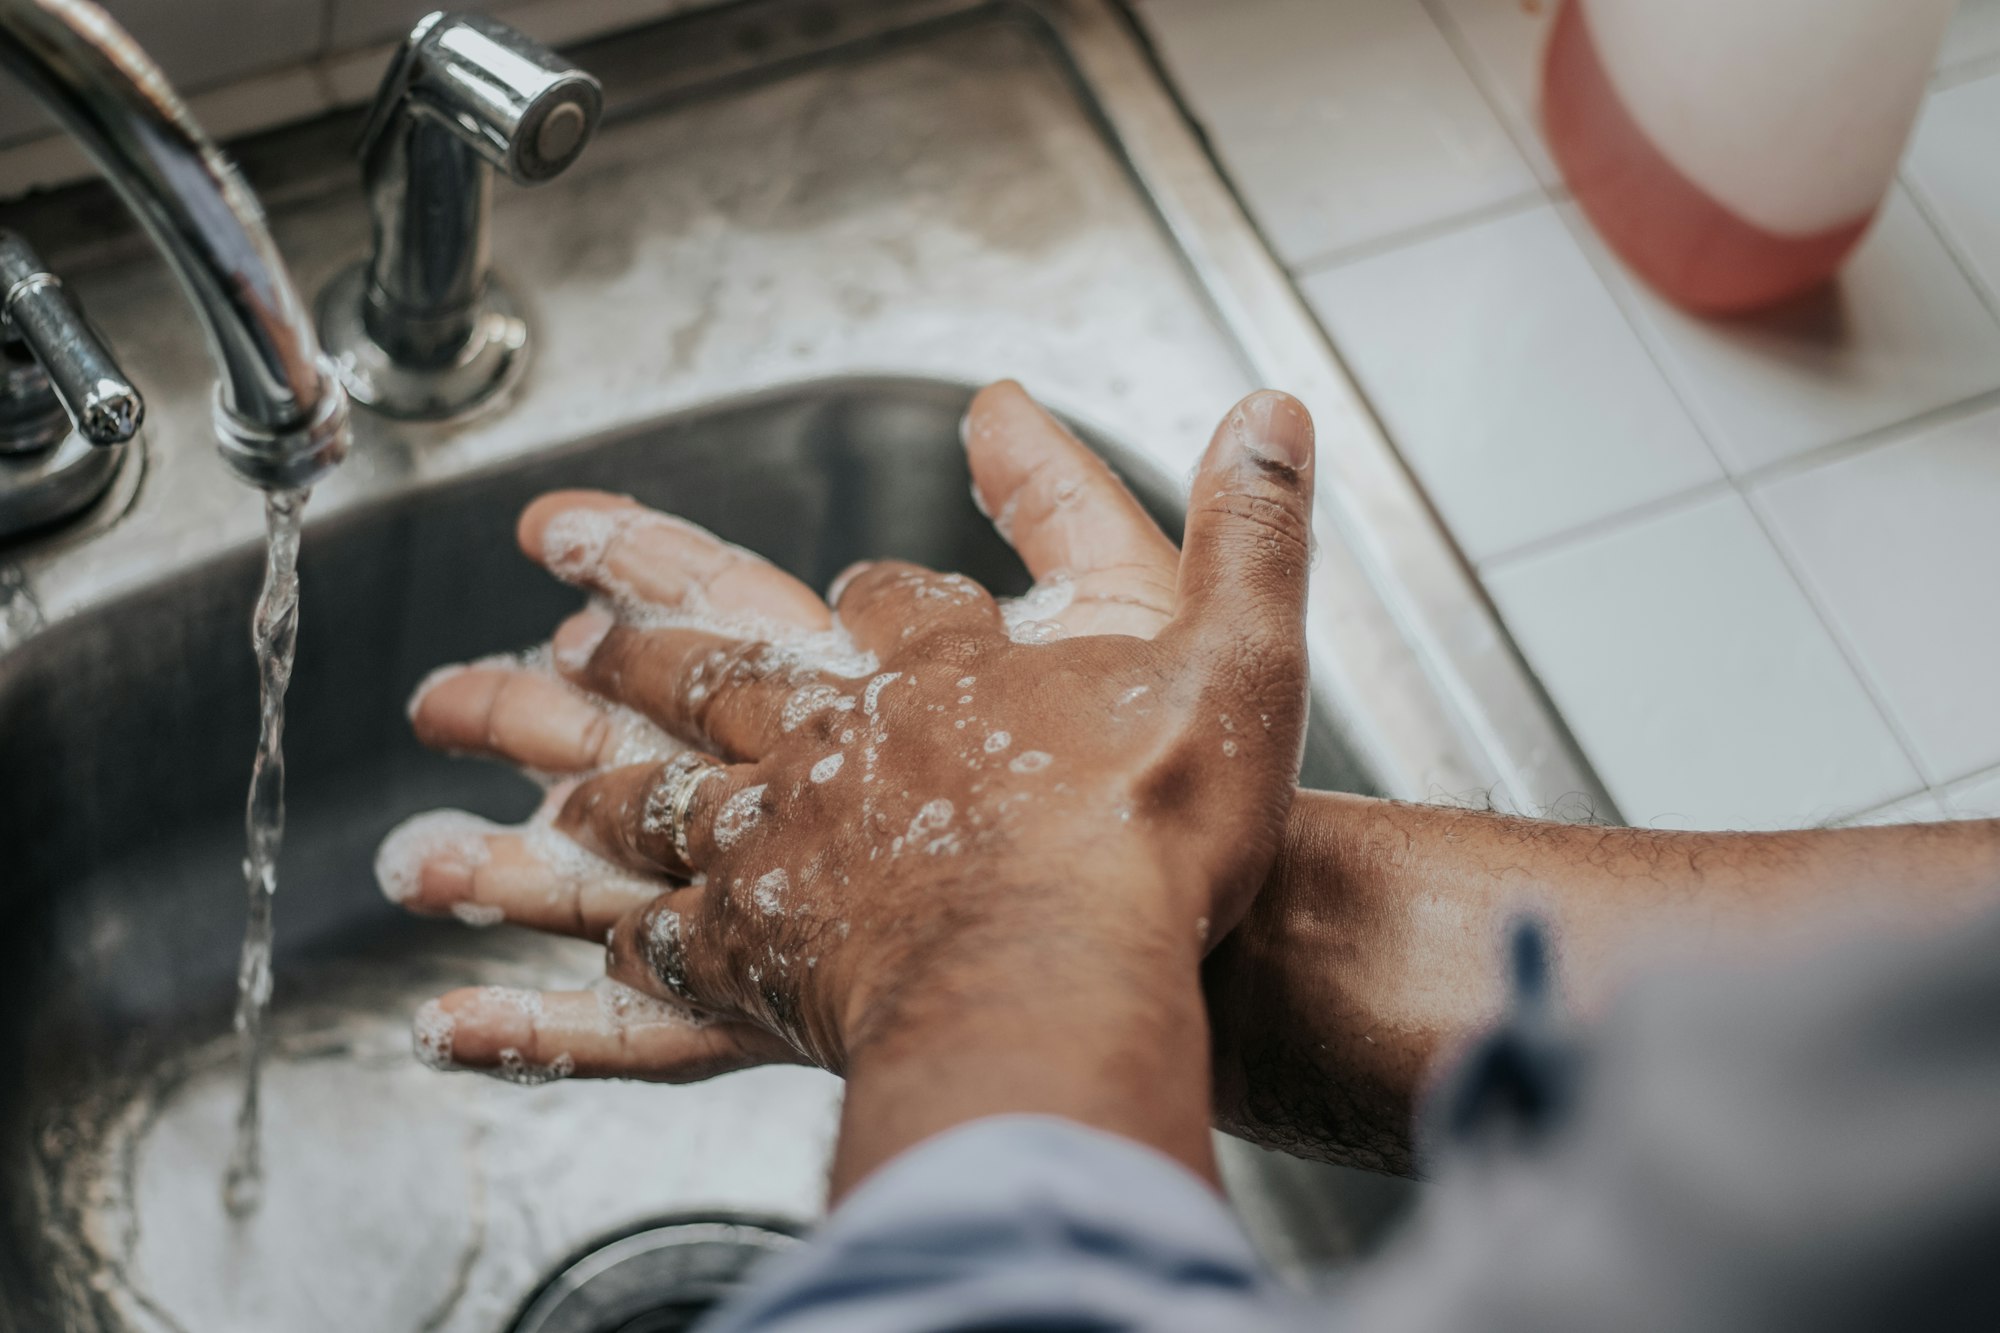 Can Washing Your Hands Reduce the Risk of Viral Infections?